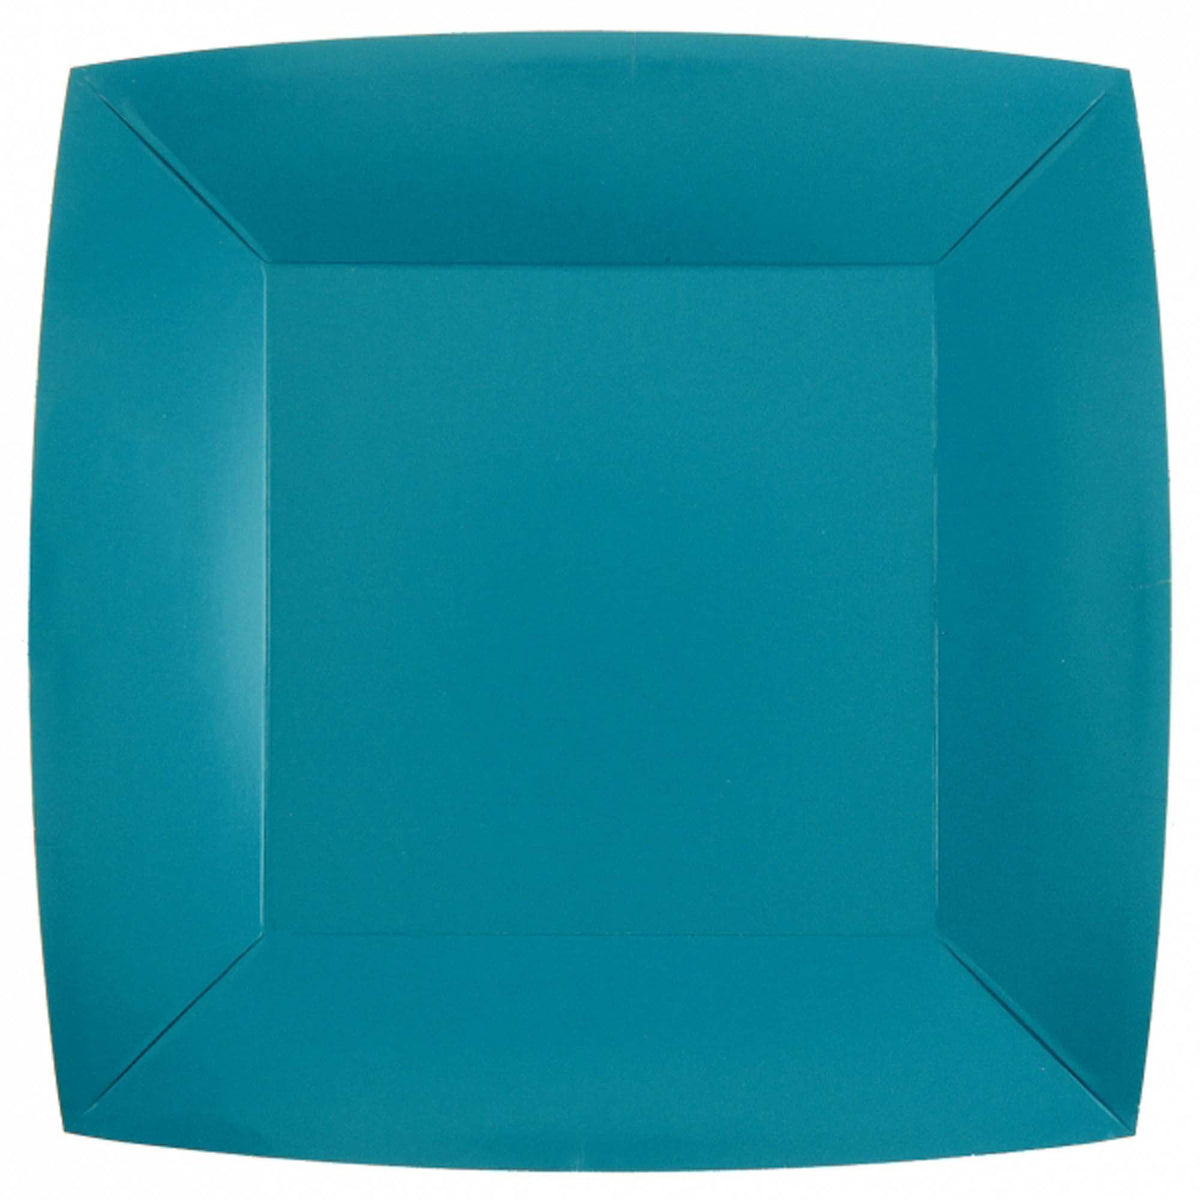 SANTEX Everyday Entertaining Aqua Blue Large Square Lunch Party Paper Plates, 9 Inches, 10 Count 3660380072447